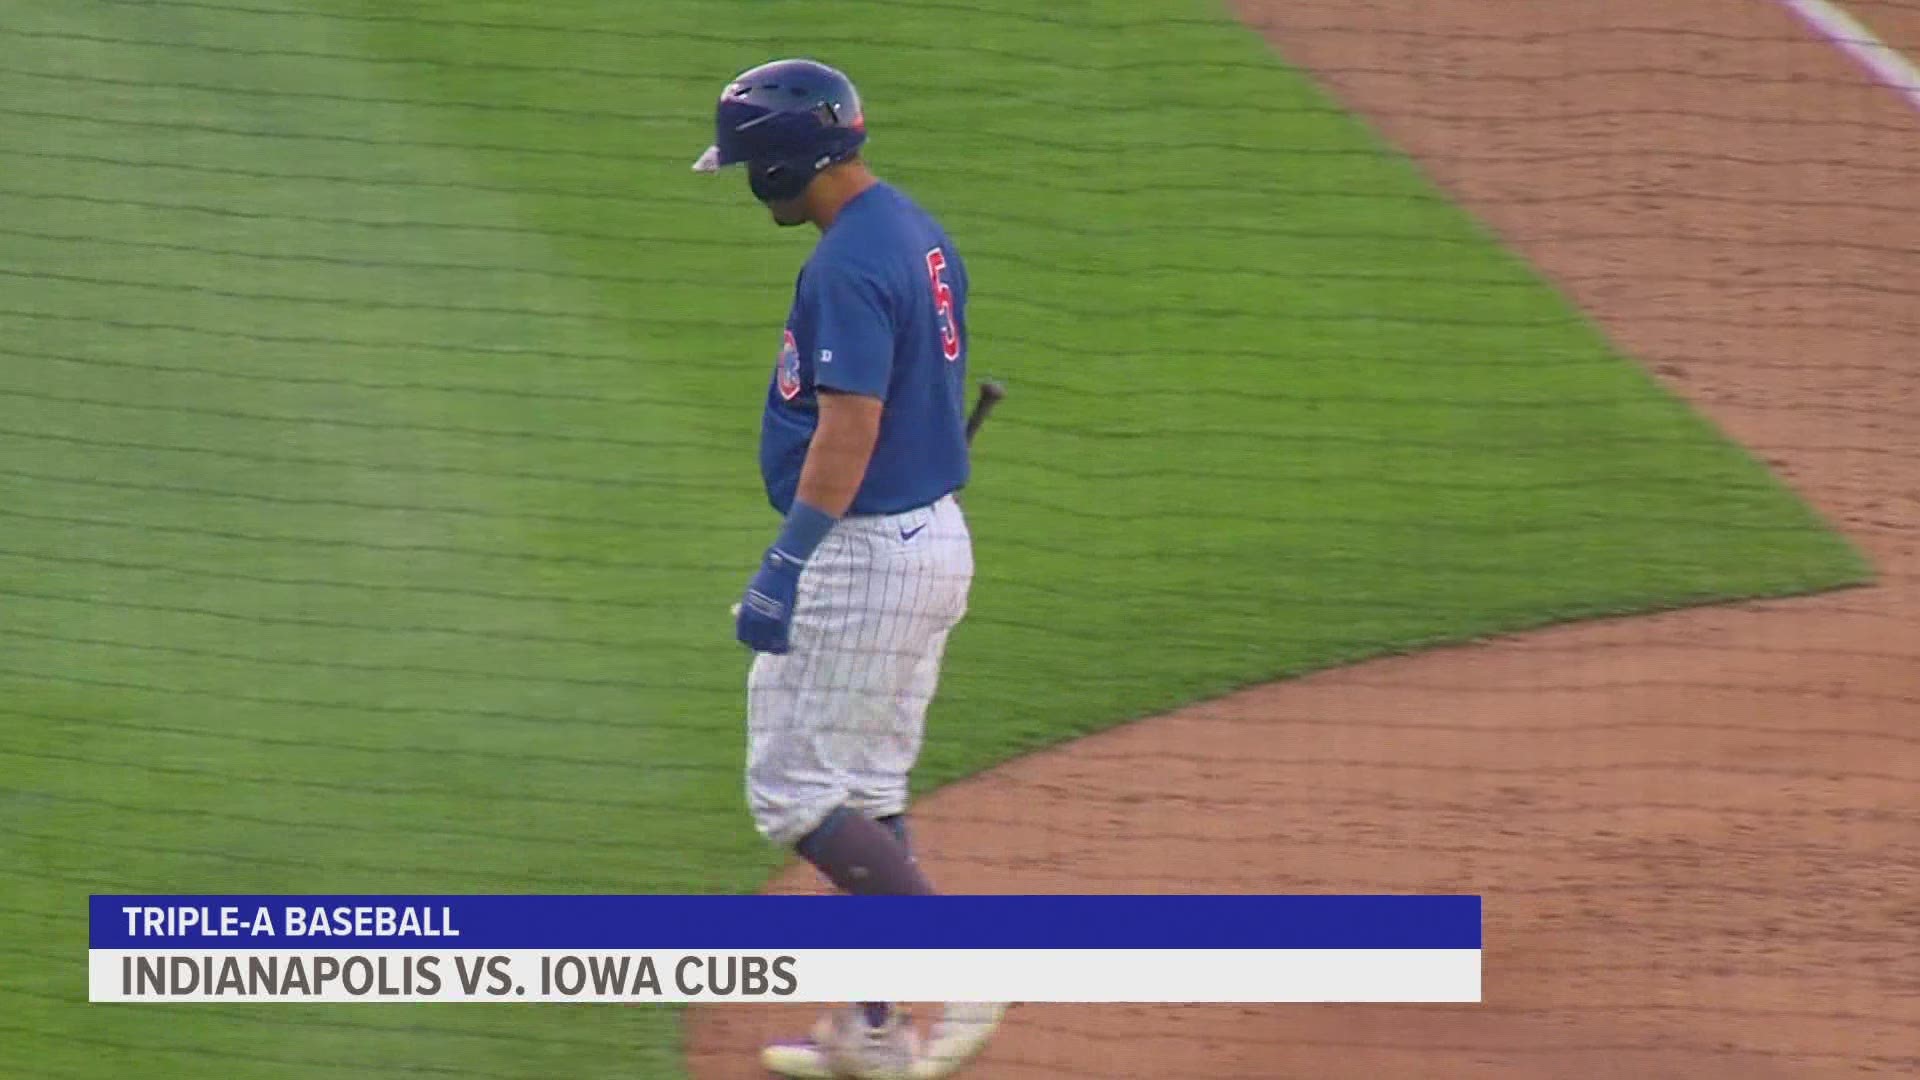 The Iowa Cubs fall in their opener 3-0 to Indianapolis. Still, fans were happy to be back at the ballpark.